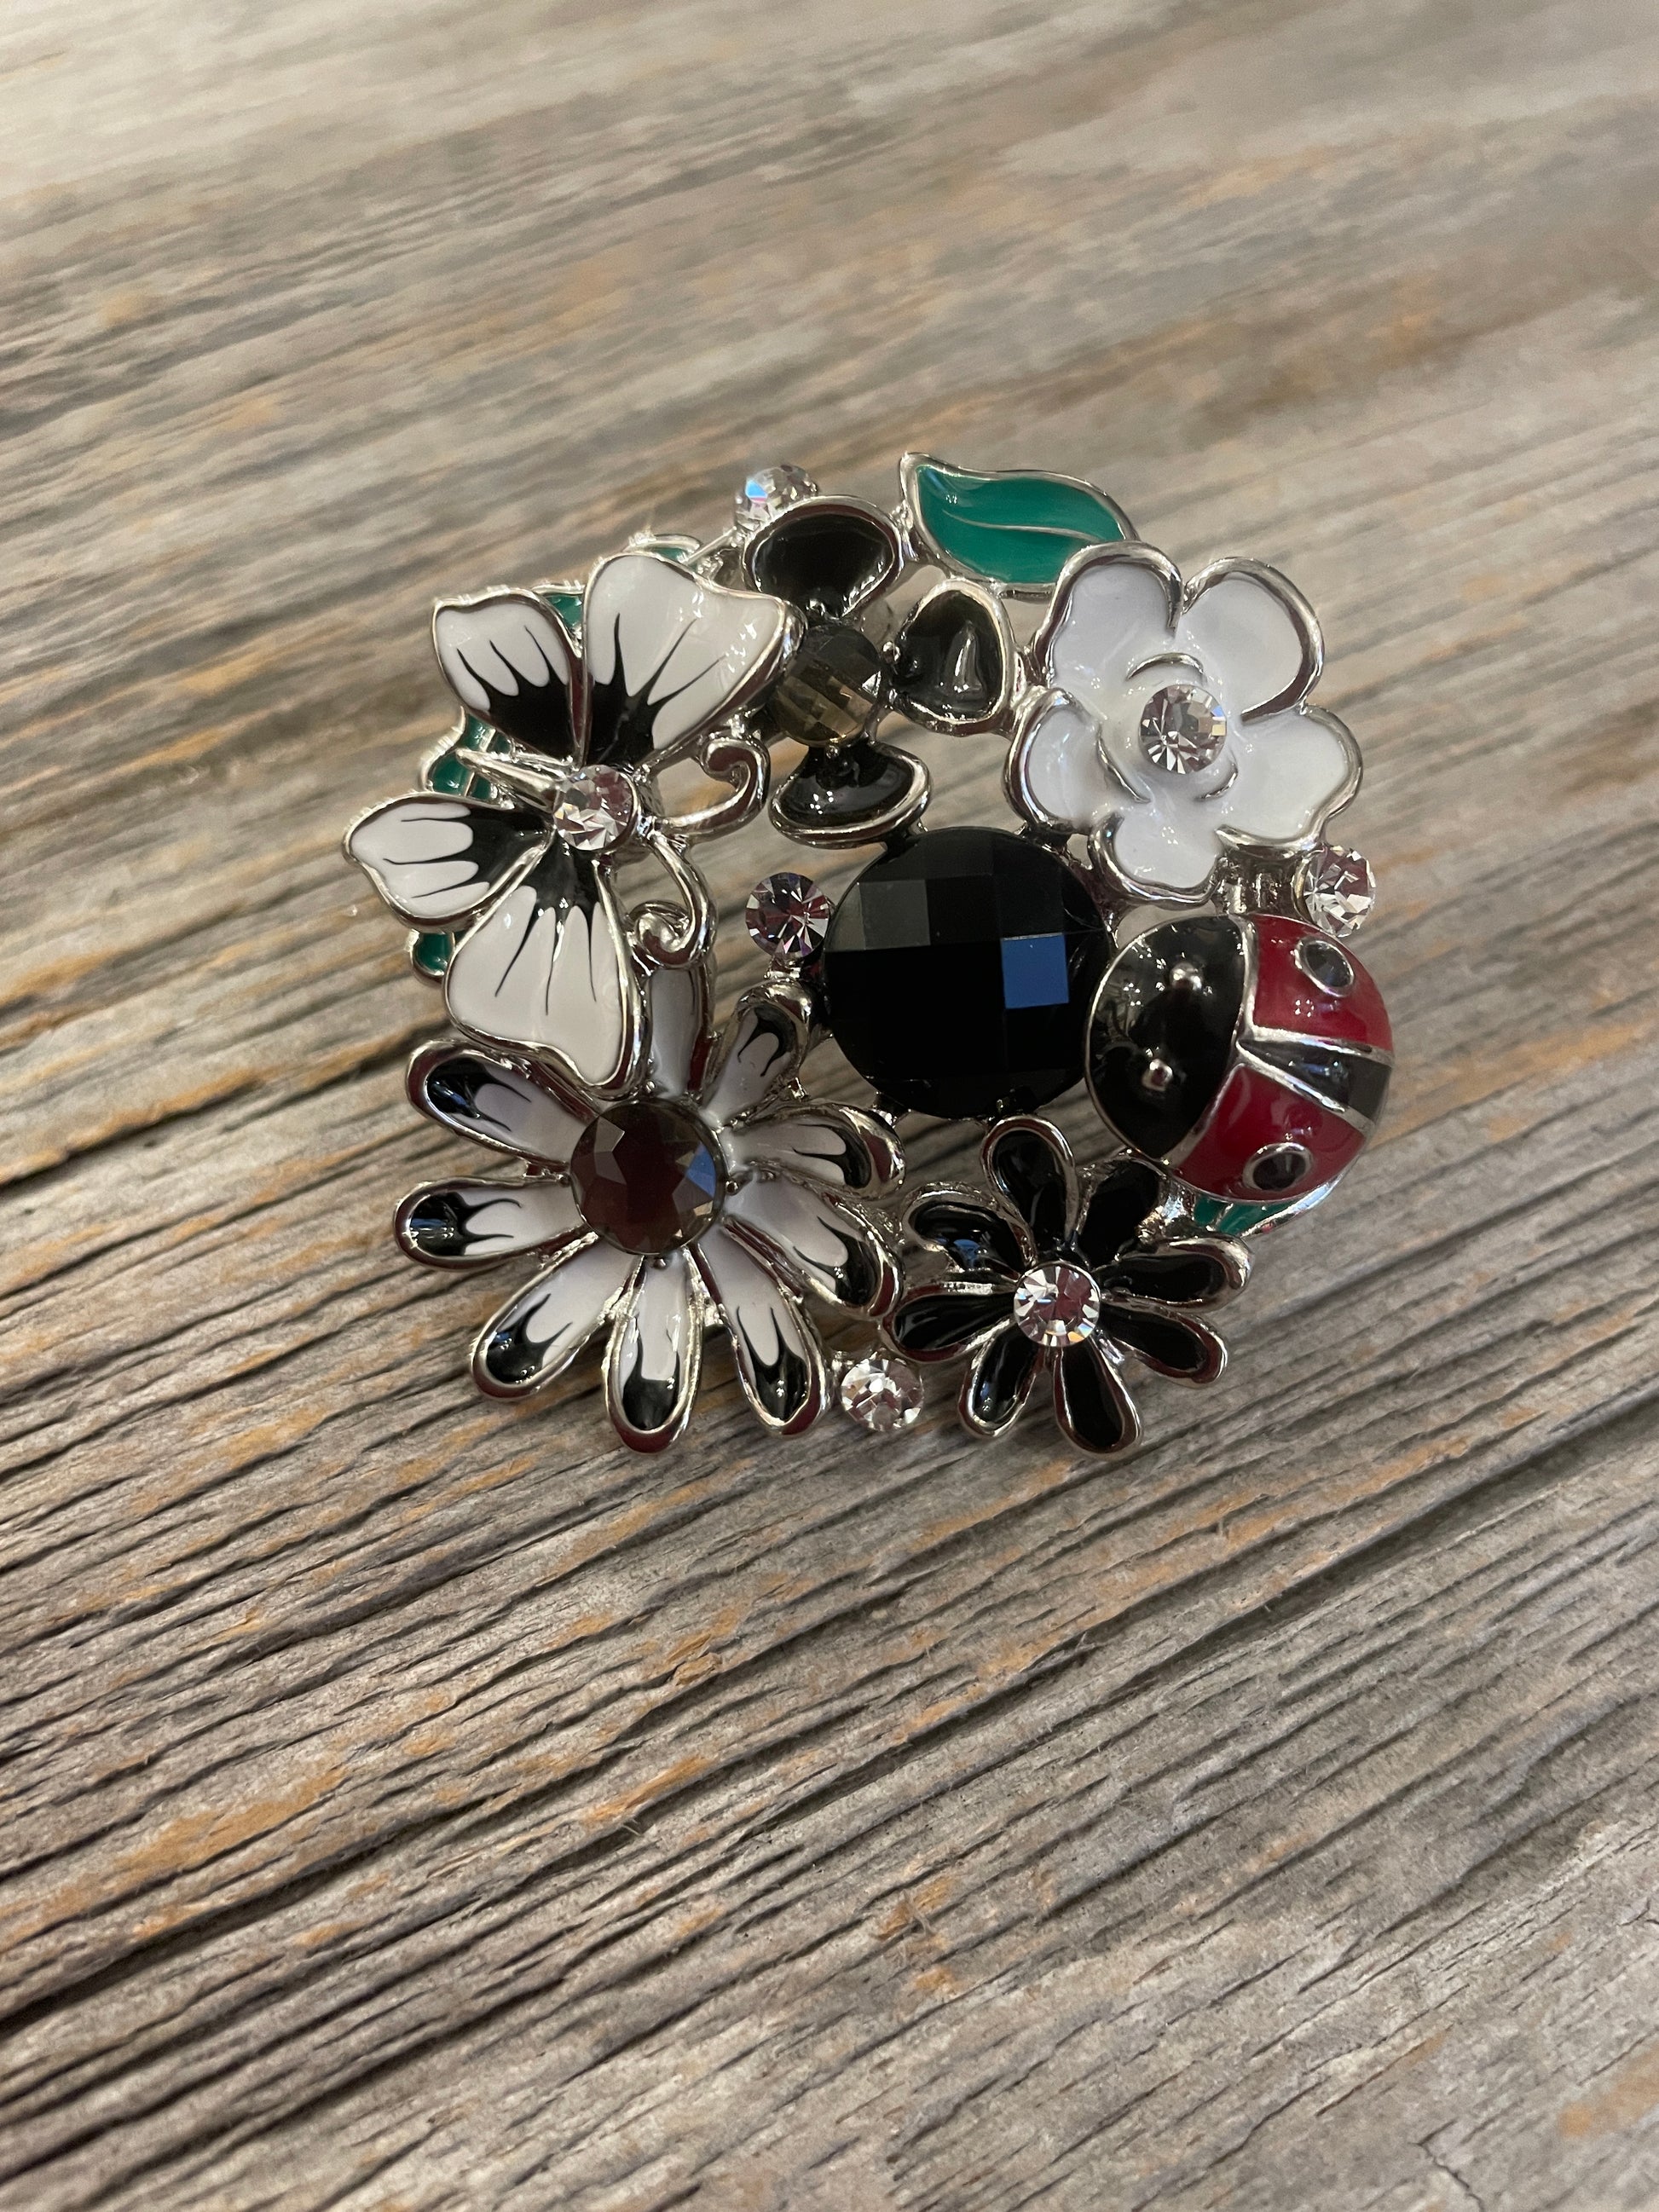 Black and White Floral Brooch Pin with ladybug